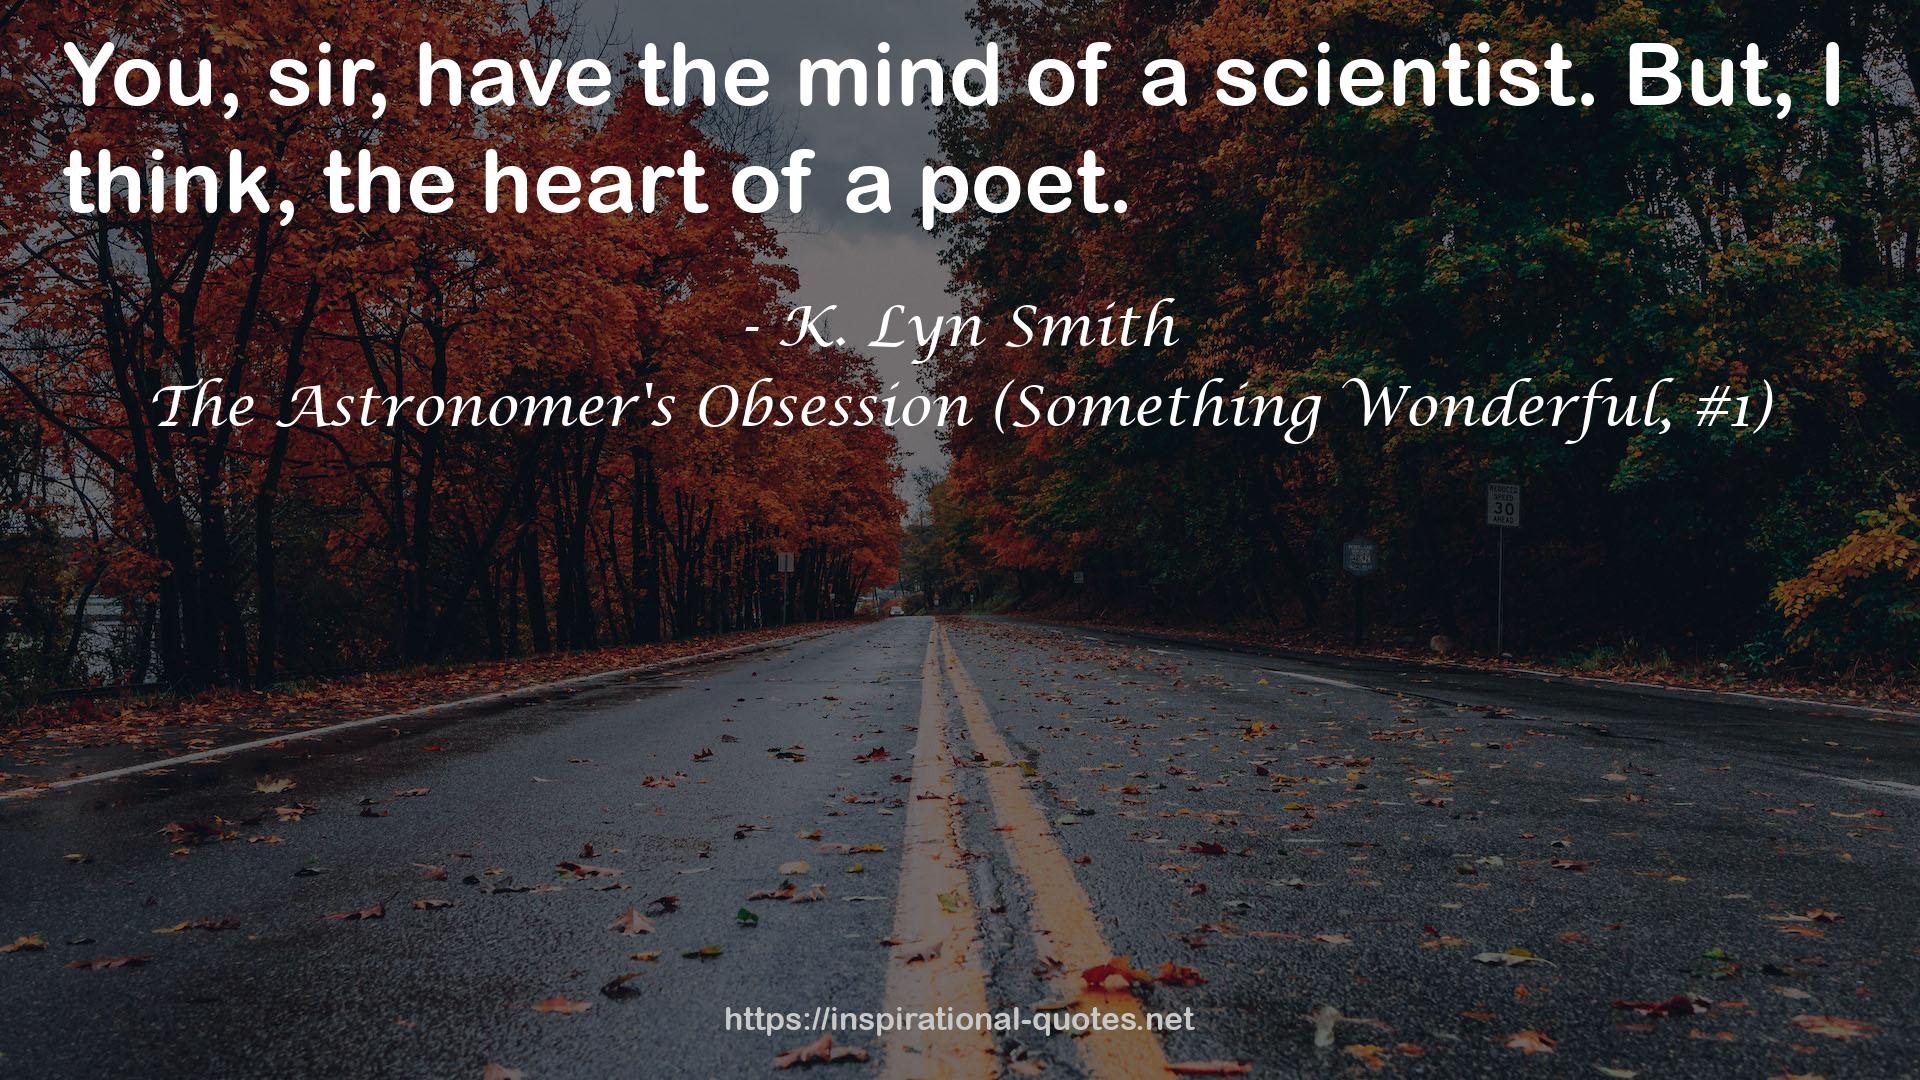 The Astronomer's Obsession (Something Wonderful, #1) QUOTES